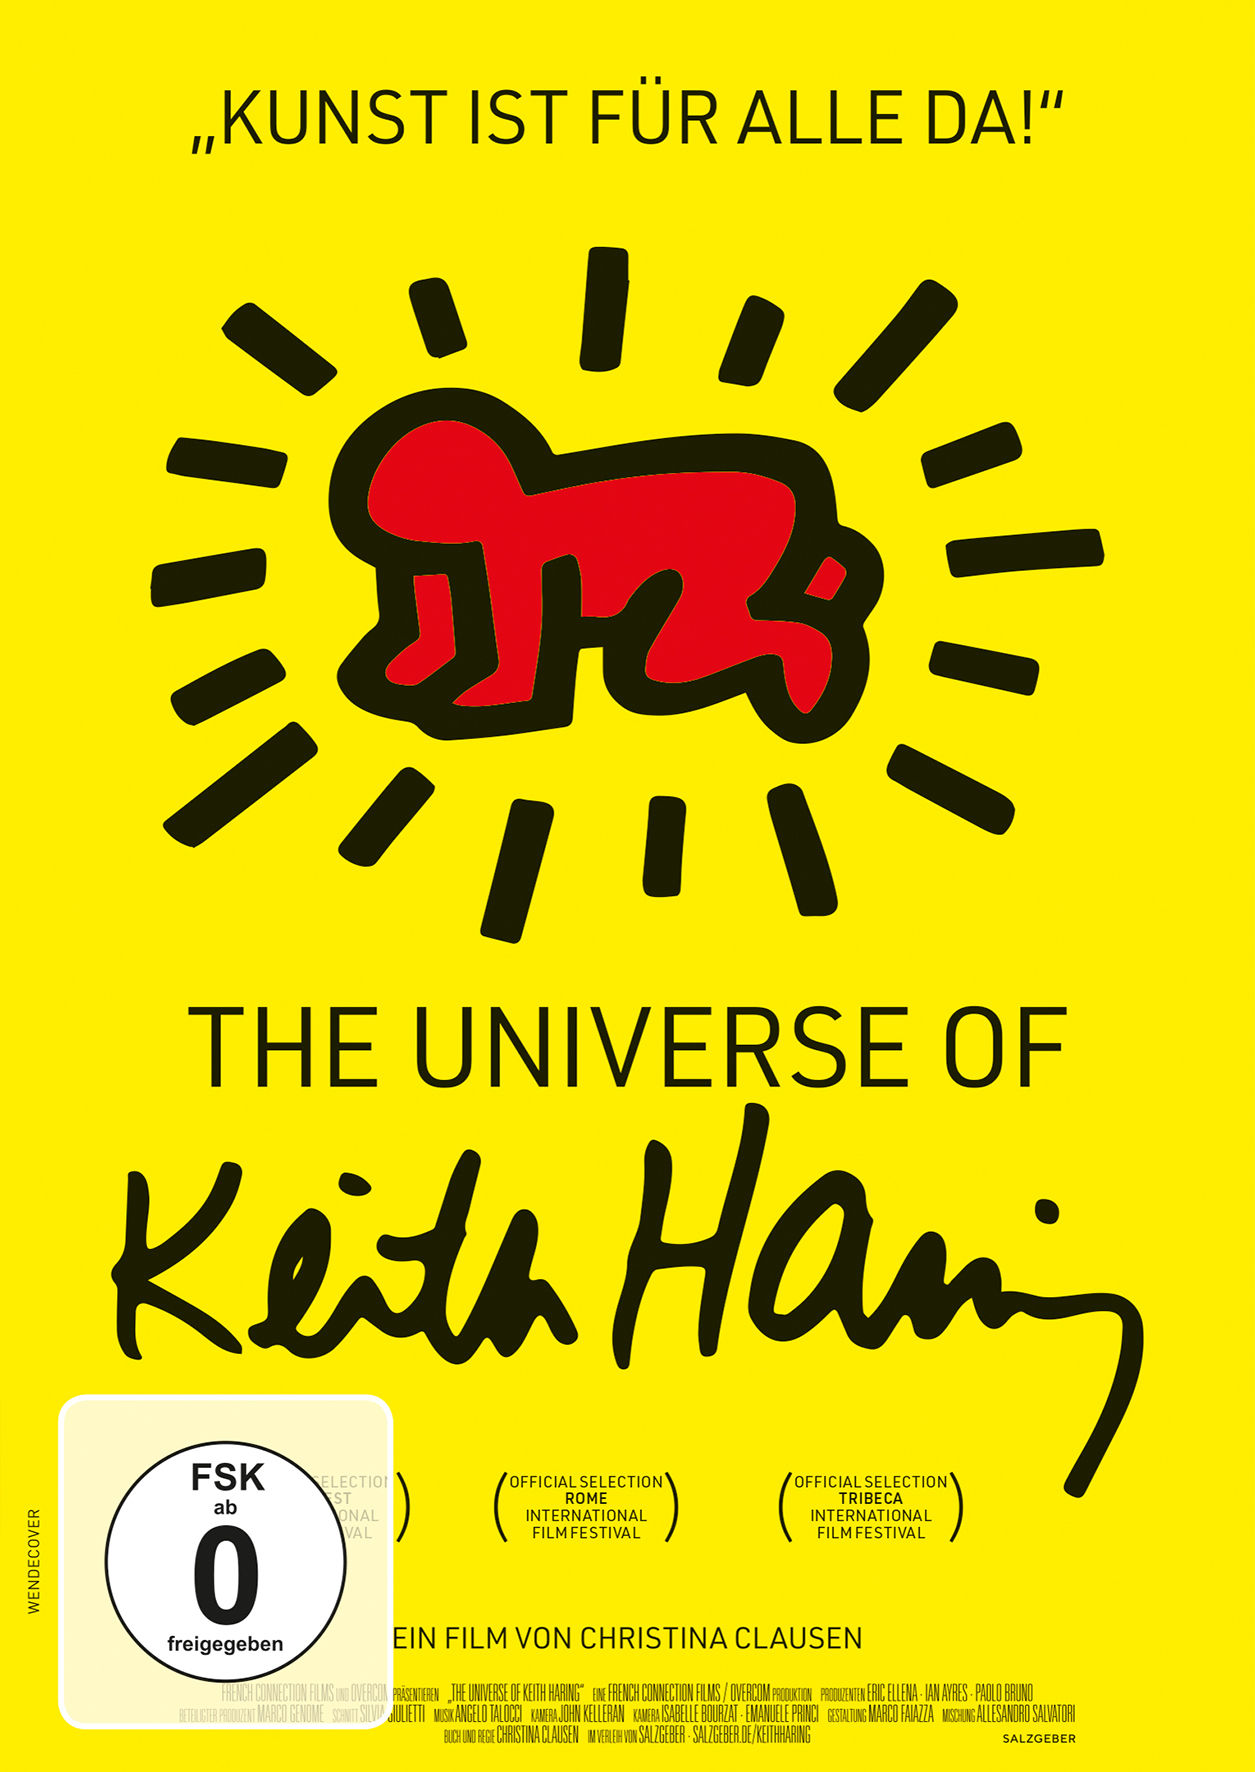 The Universe of Keith Haring